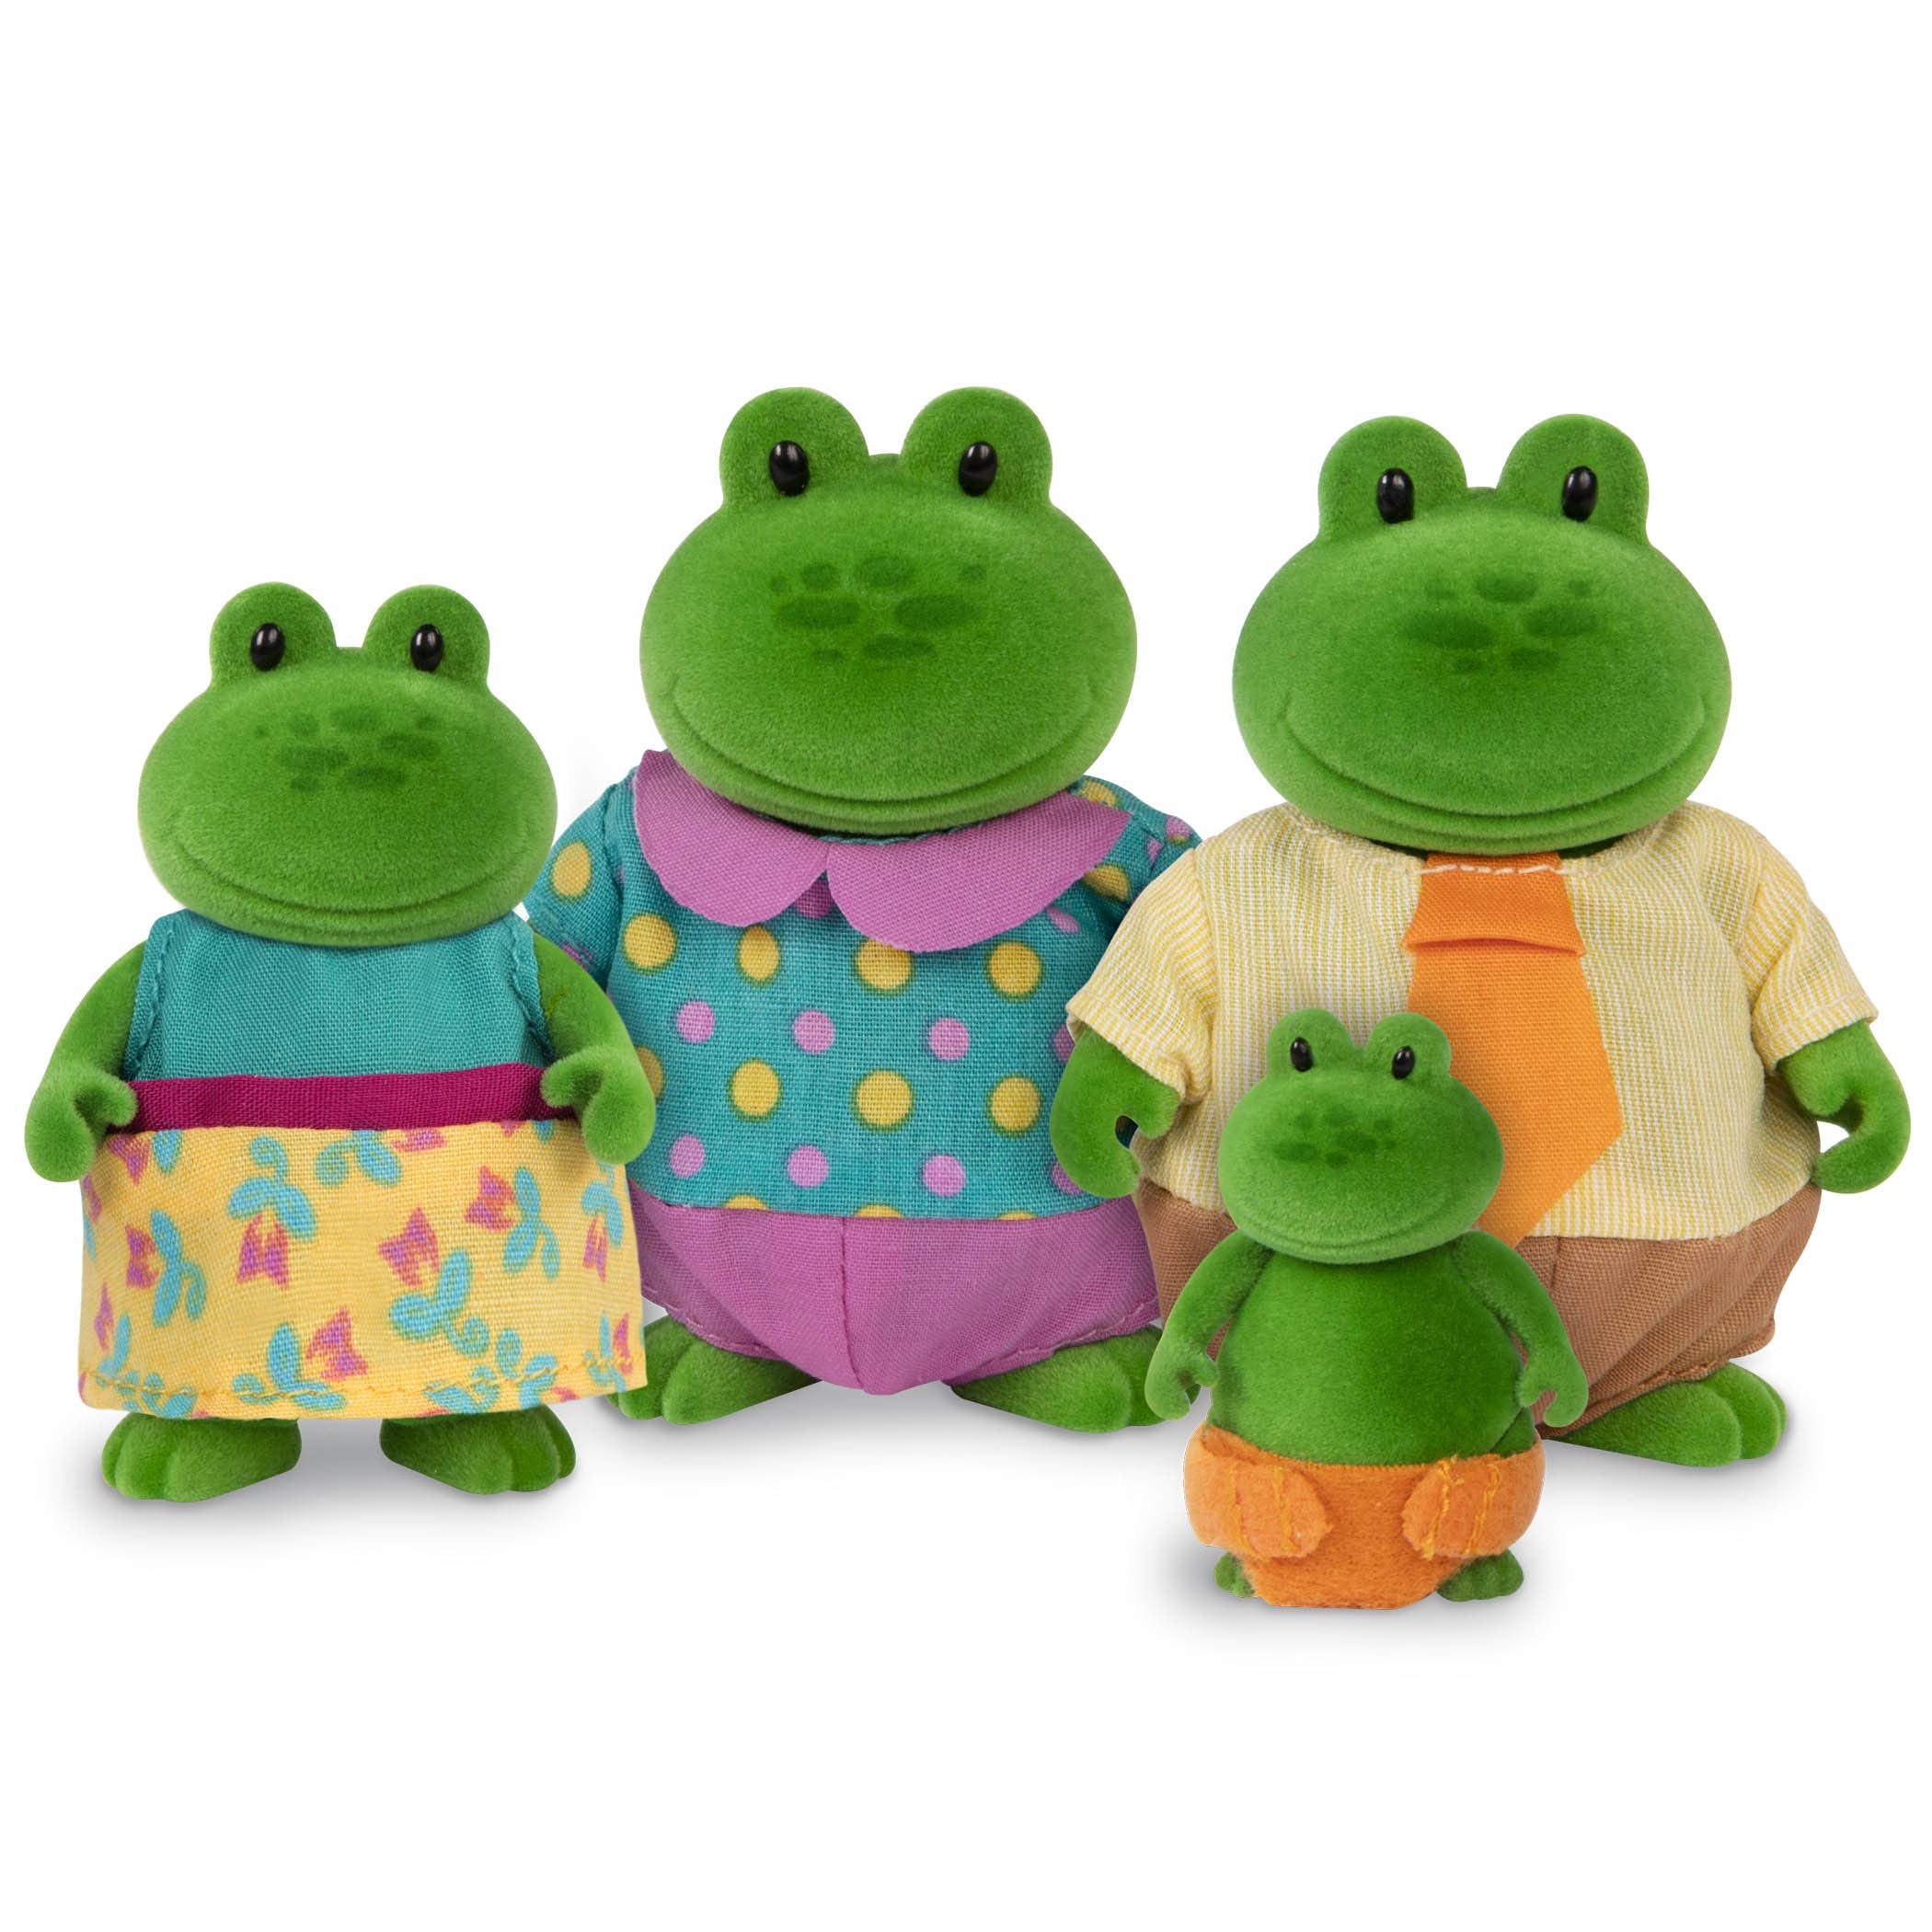 Li’l Woodzeez – Croakalily Frog Family – 5pc Toy Set with Miniature Animal Figurines and Storybook – Animal Toys and Accessories for Kids Age 3+